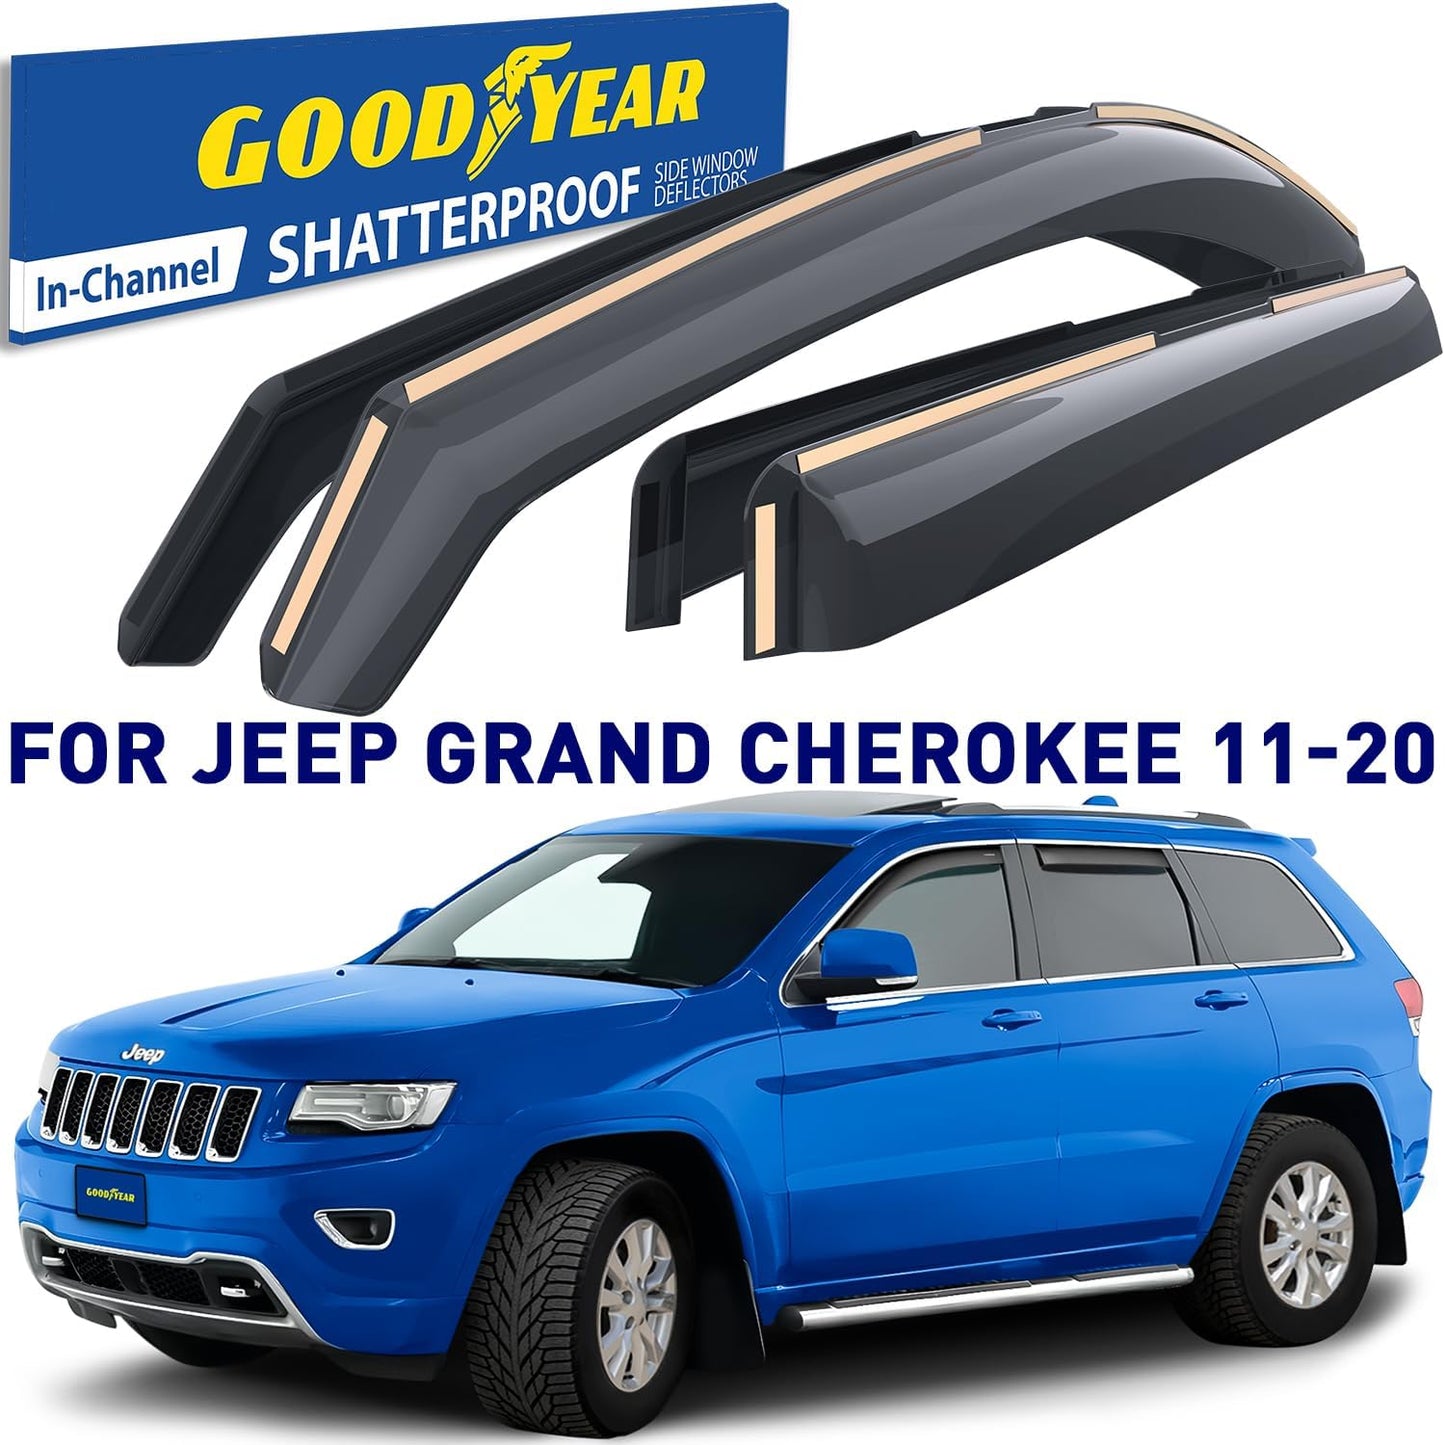 Goodyear Shatterproof in-Channel Window Deflectors for Jeep Grand Cherokee 2011-2020, Rain Guards, Window Visors for Cars, Vent Deflector, Car Accessories, 4 pcs - GY003442LP